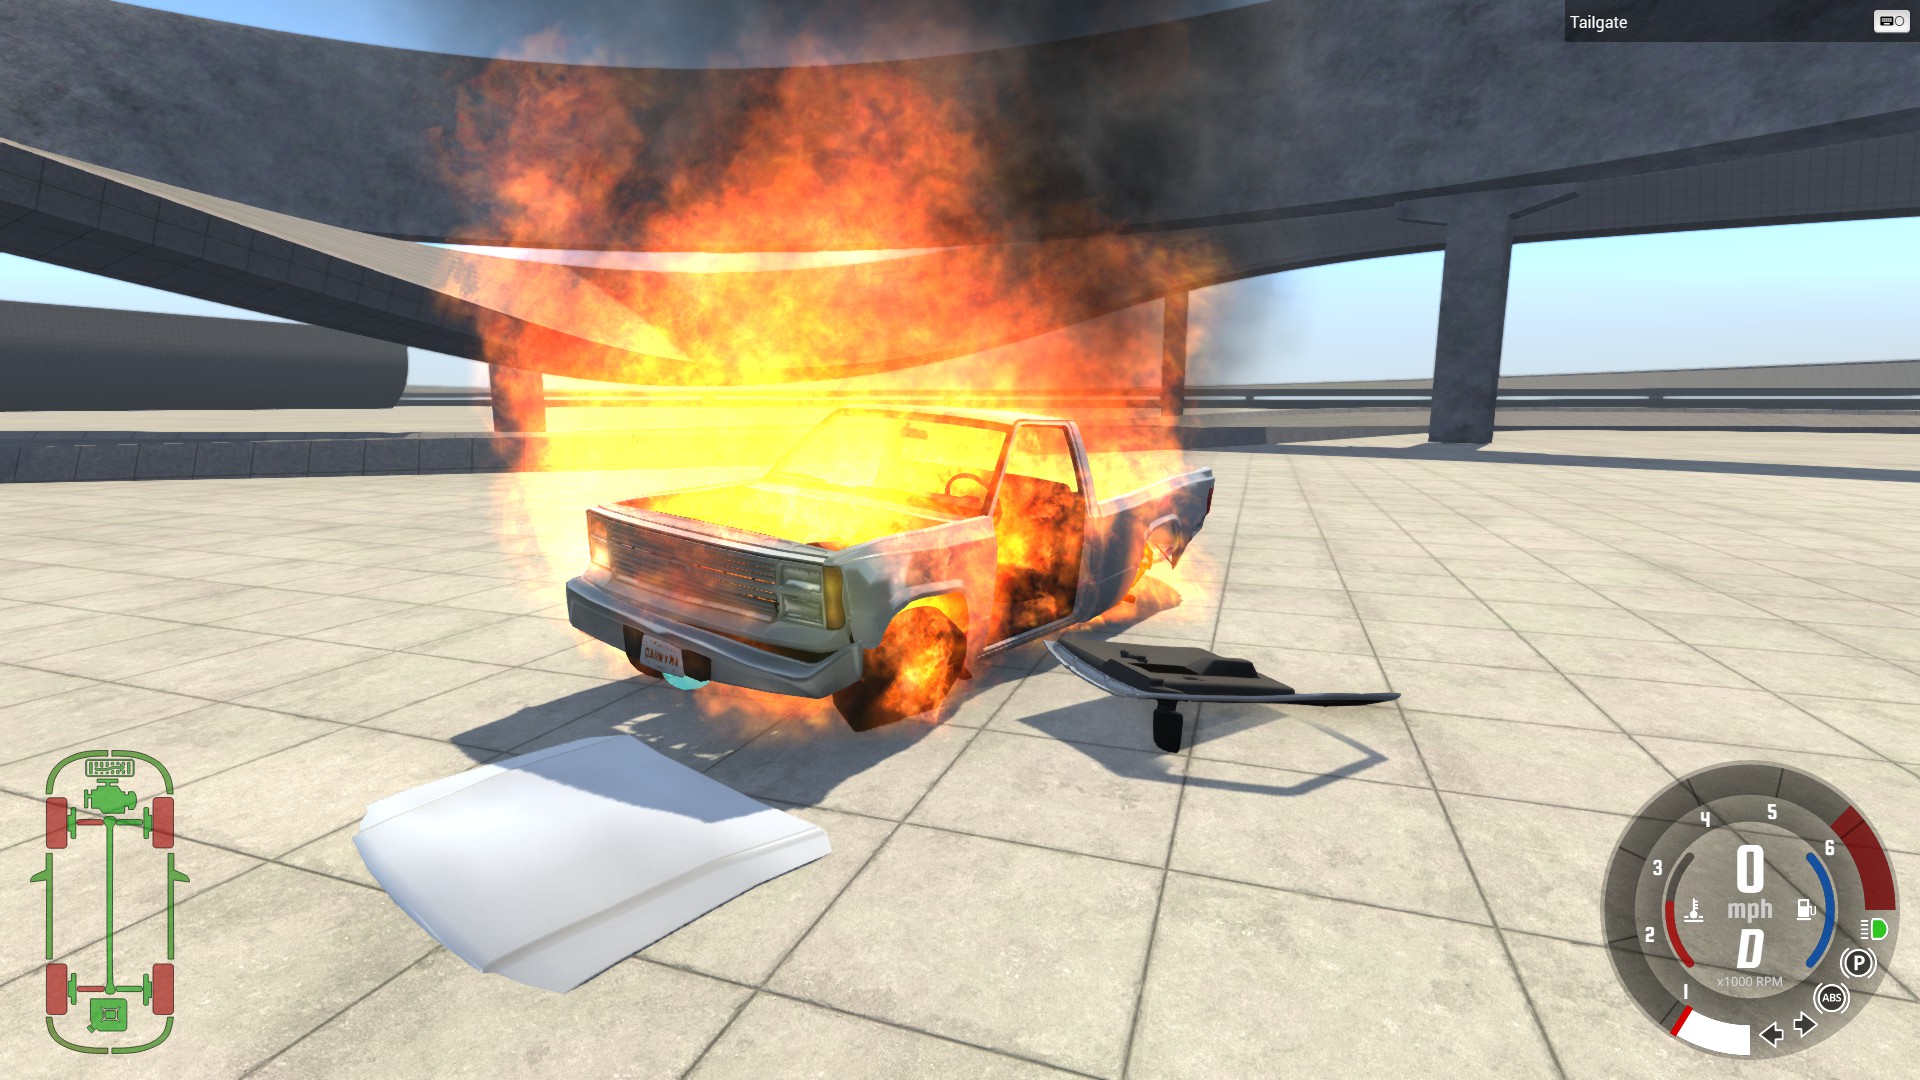 how to get beamng drive free